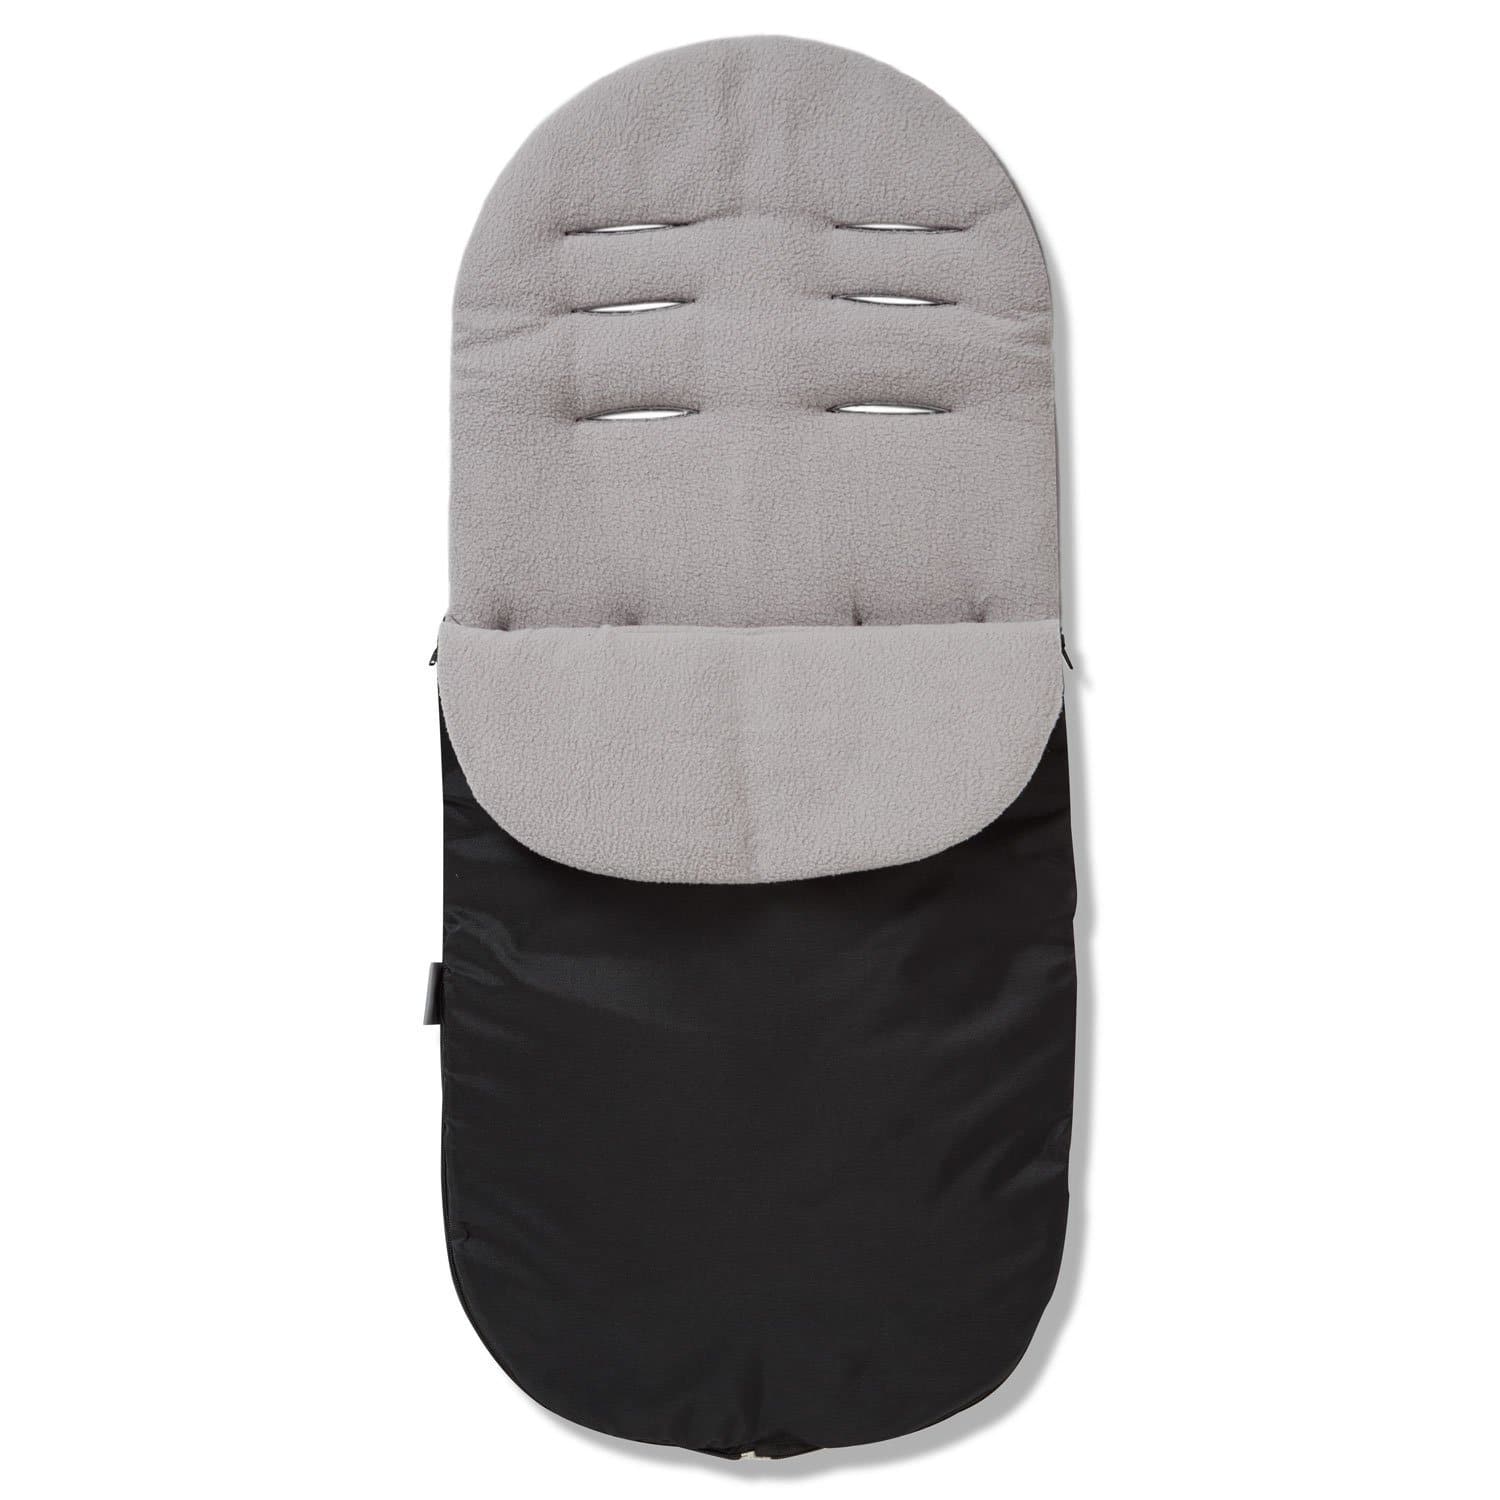 Footmuff / Cosy Toes Compatible with BabySun - Grey / Fits All Models | For Your Little One